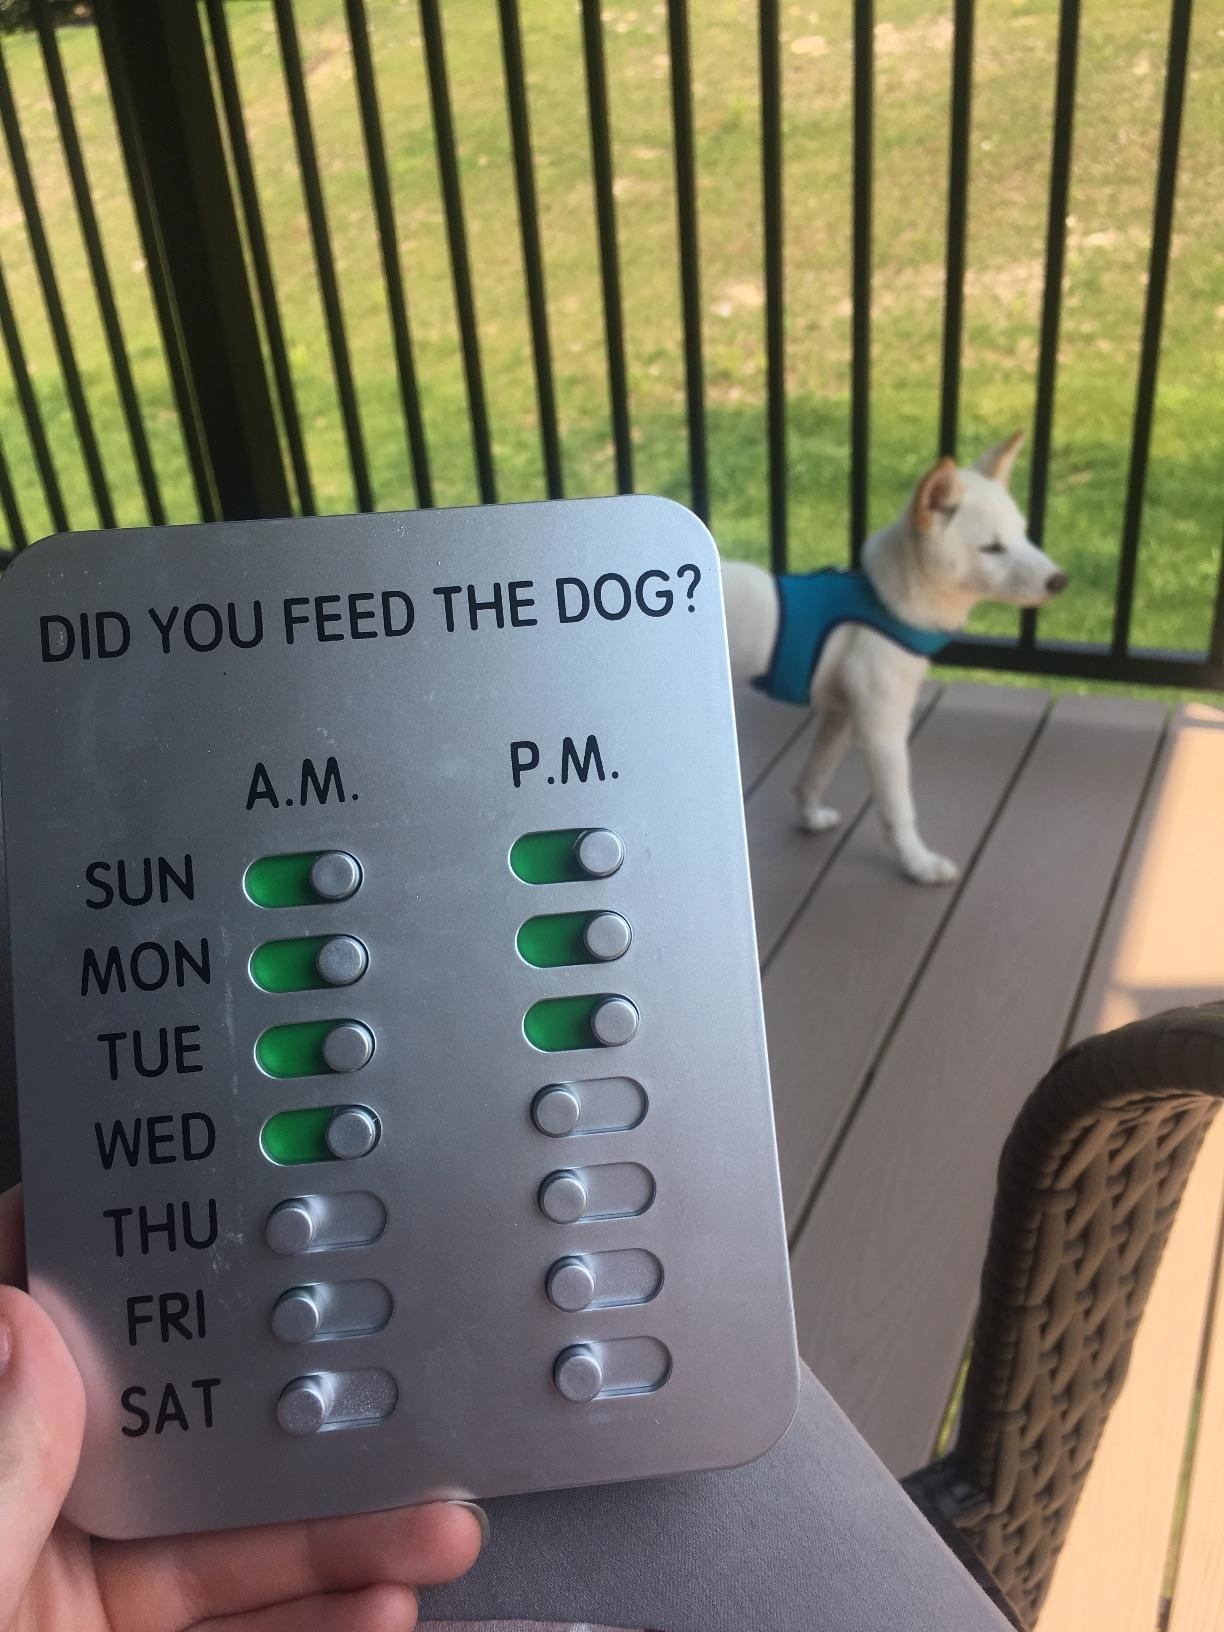 device with 14 sliders, two for each day to record when the dog has been fed